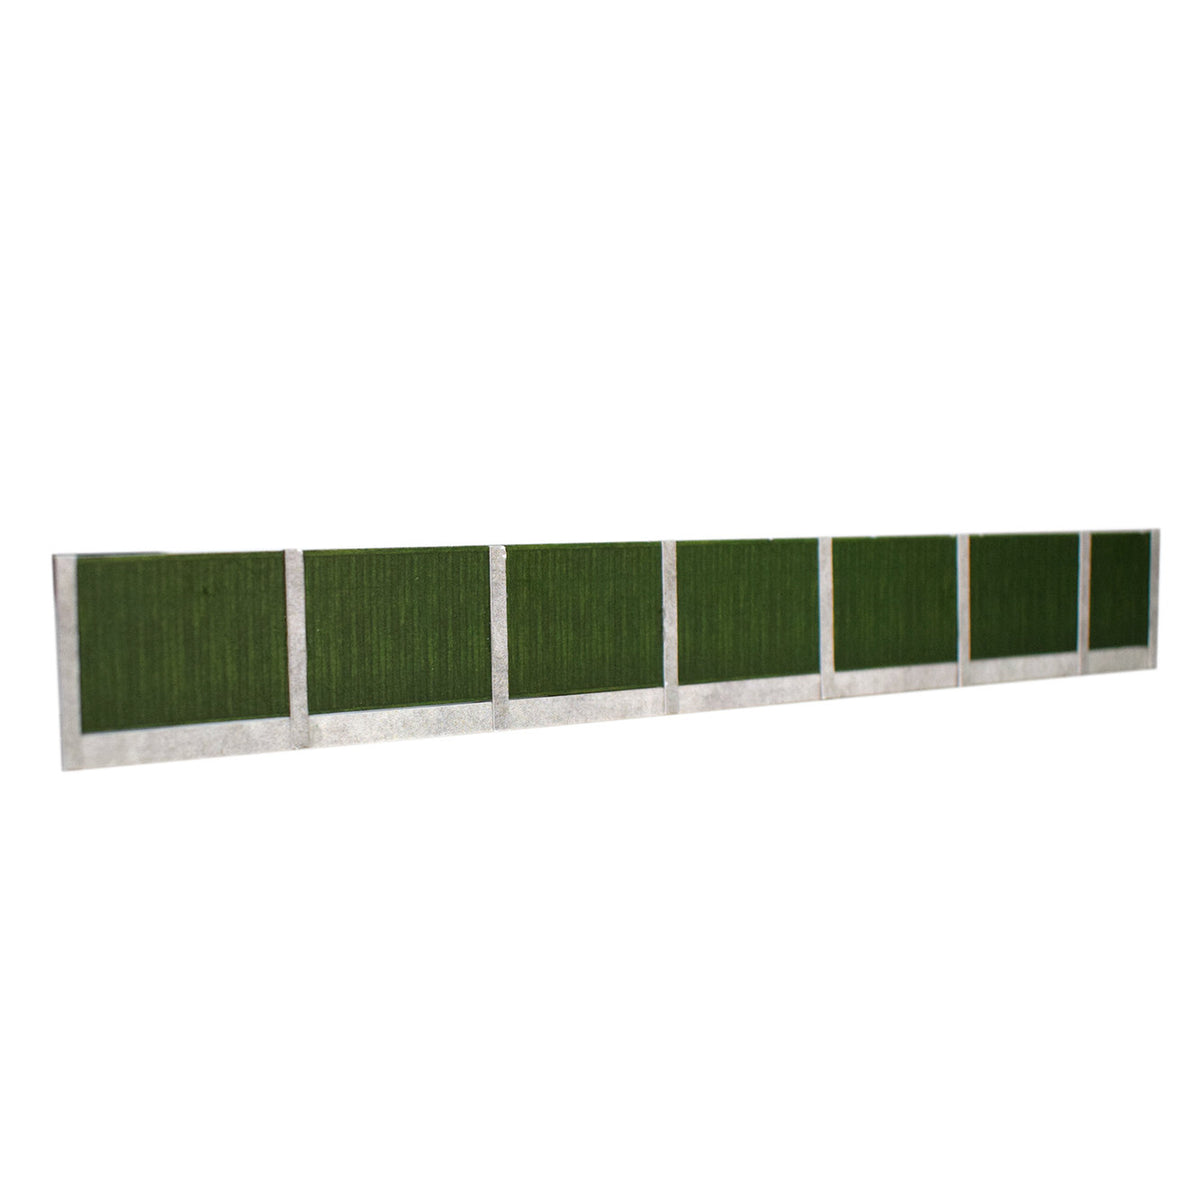 ATD Models Timber Fencing Green with Concrete Posts Card Kit ATD015